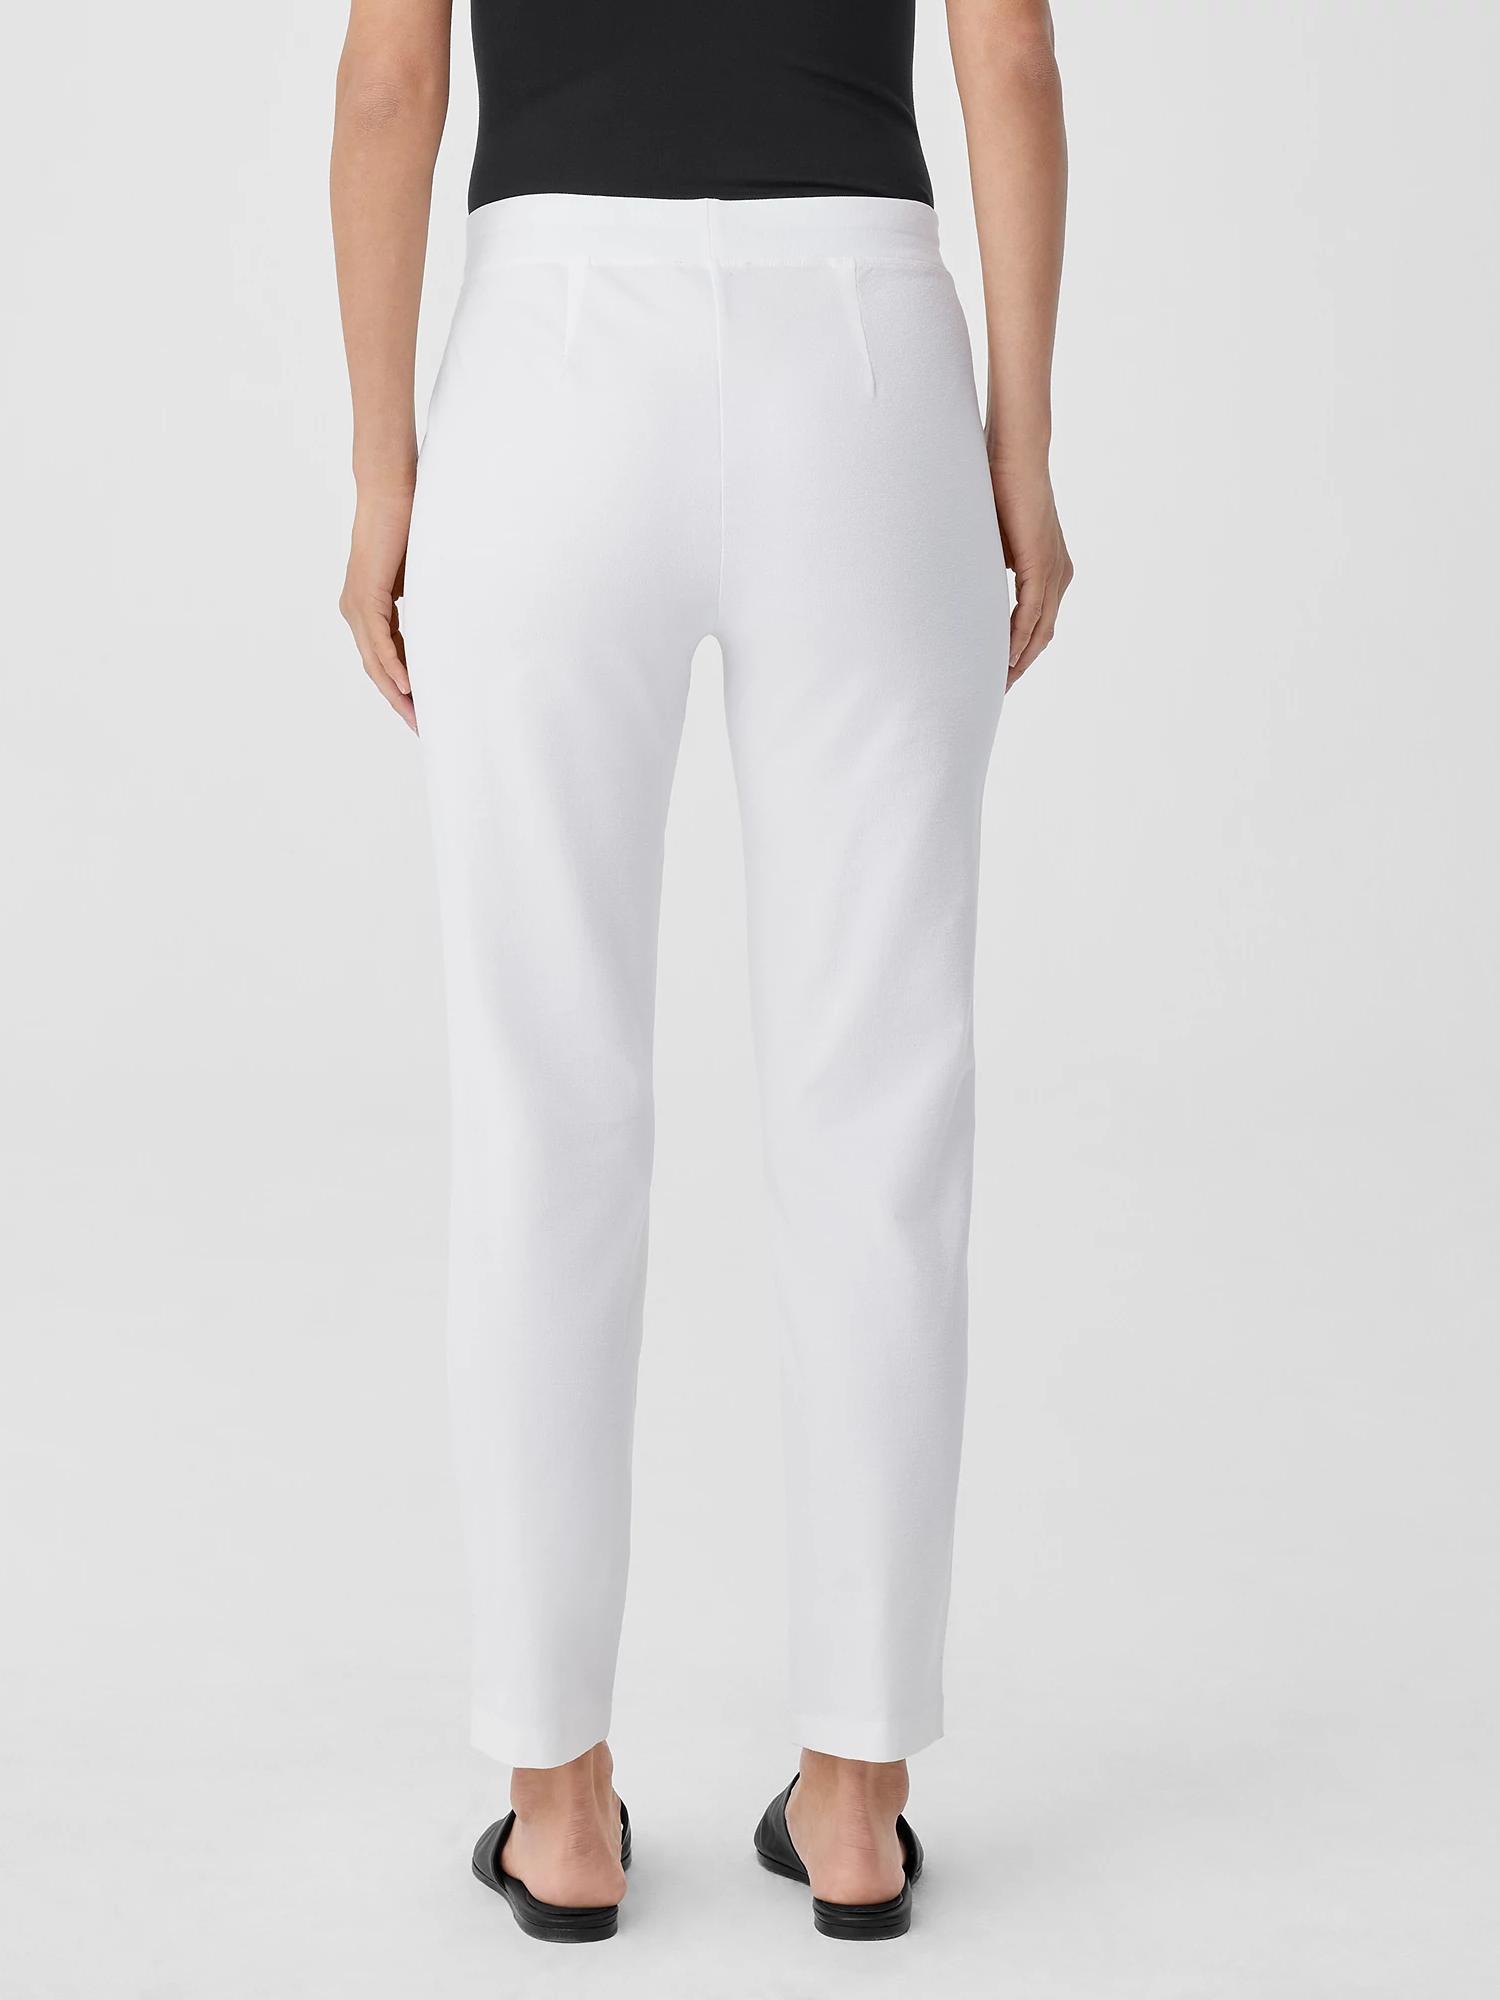 https://cdna.lystit.com/photos/eileenfisher/7ca9c745/eileen-fisher-White-Washable-Stretch-Crepe-Pant.jpeg